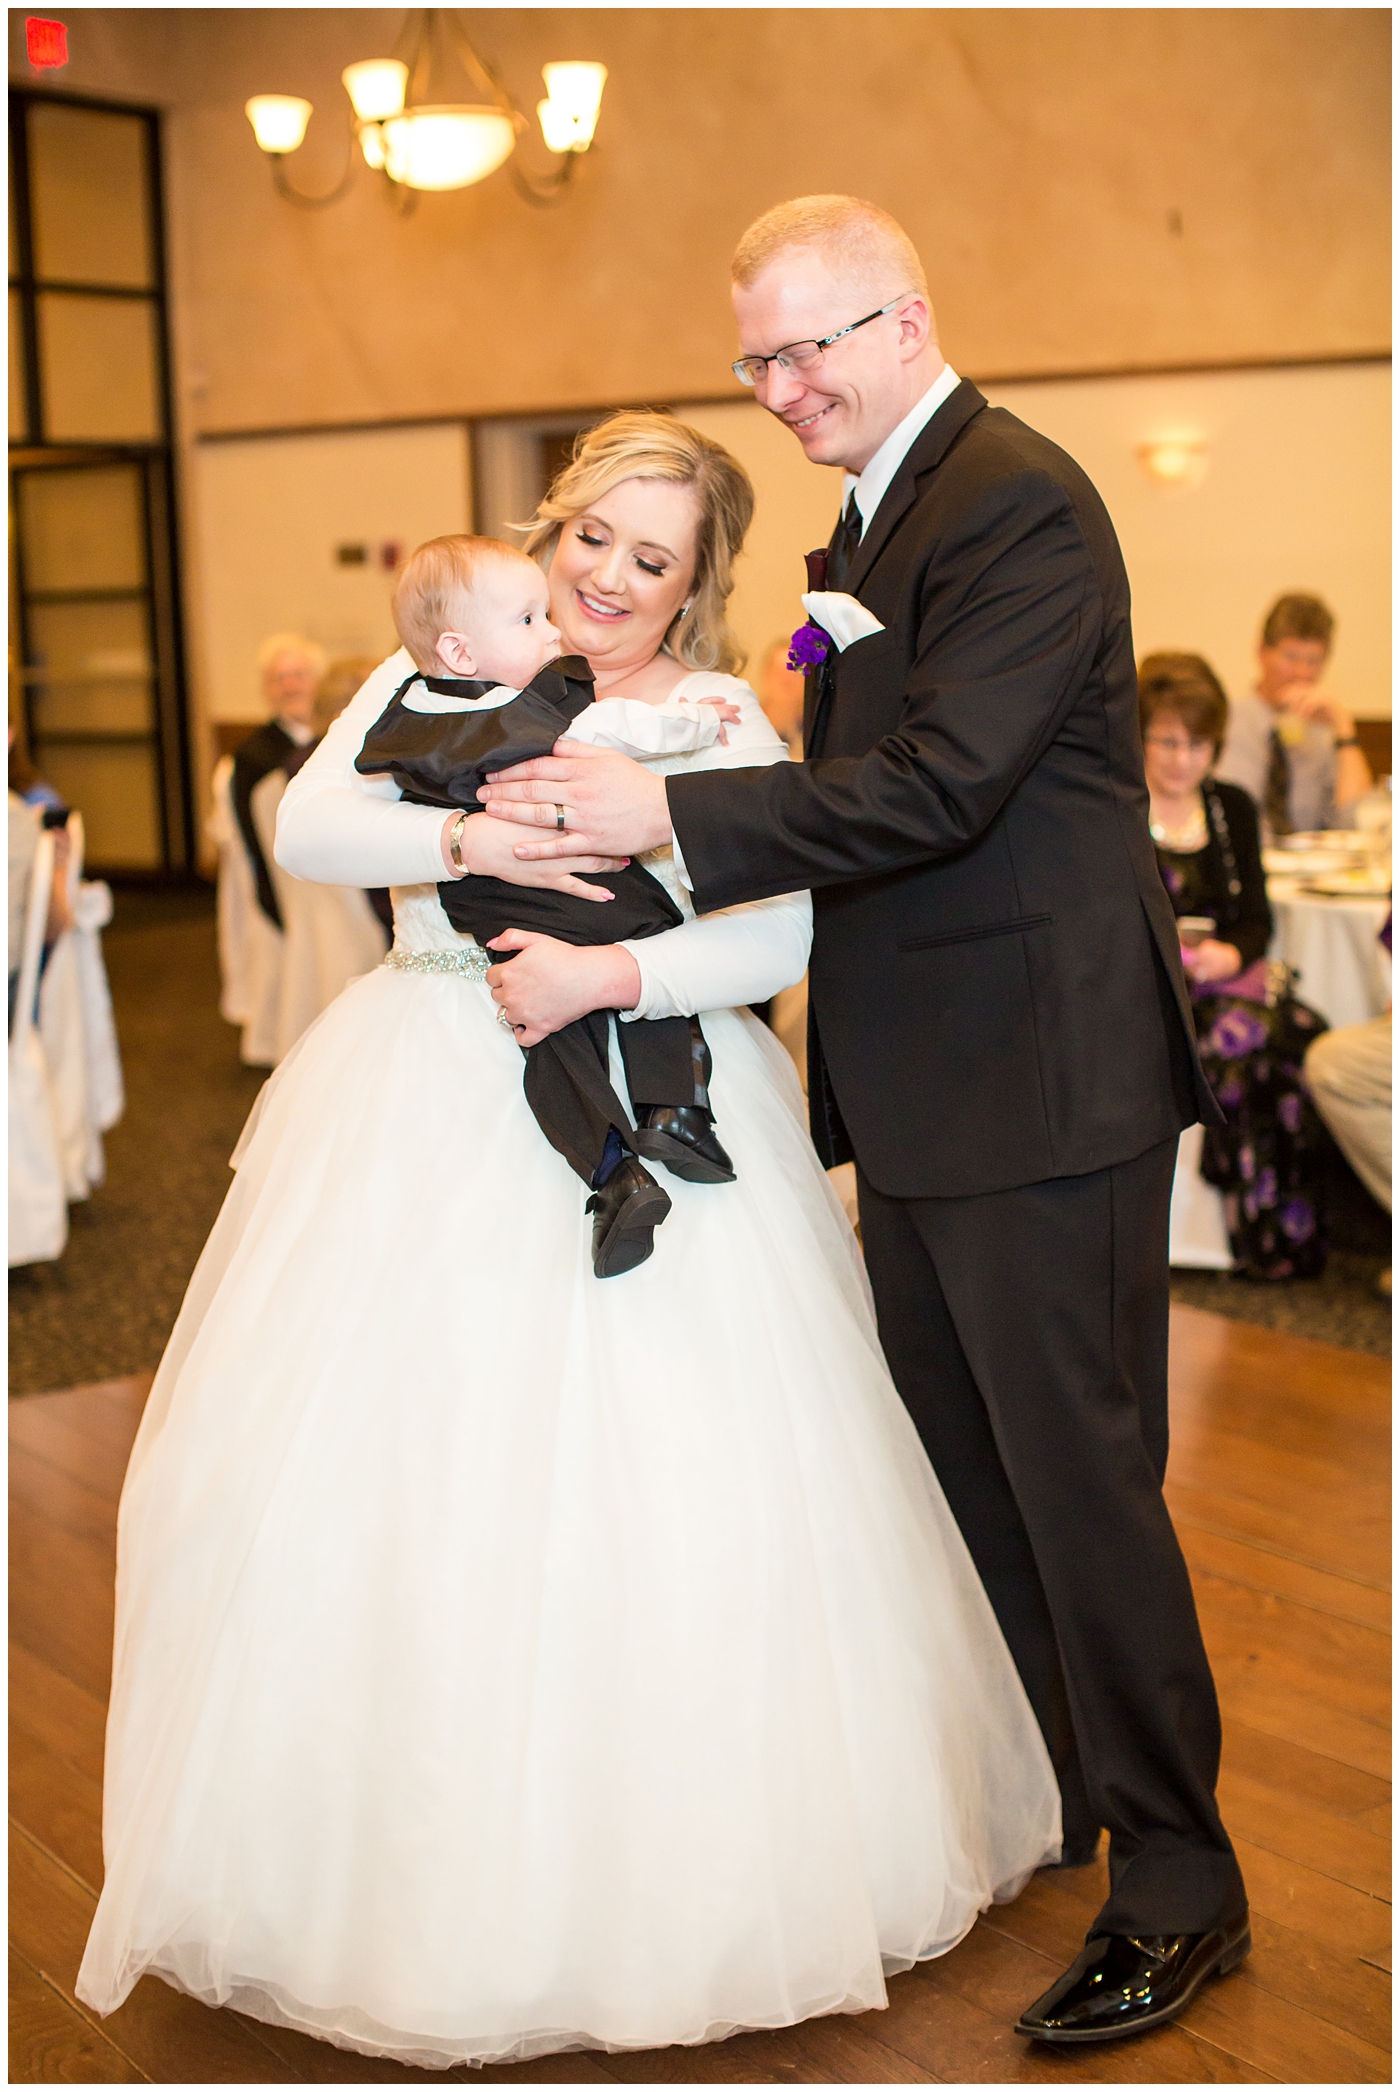 blonde bride in long sleeve wedding dress with purple and white flower bouquet and groom in black suit with purple calla lilly boutonniere wedding day first dance in ballroom reception